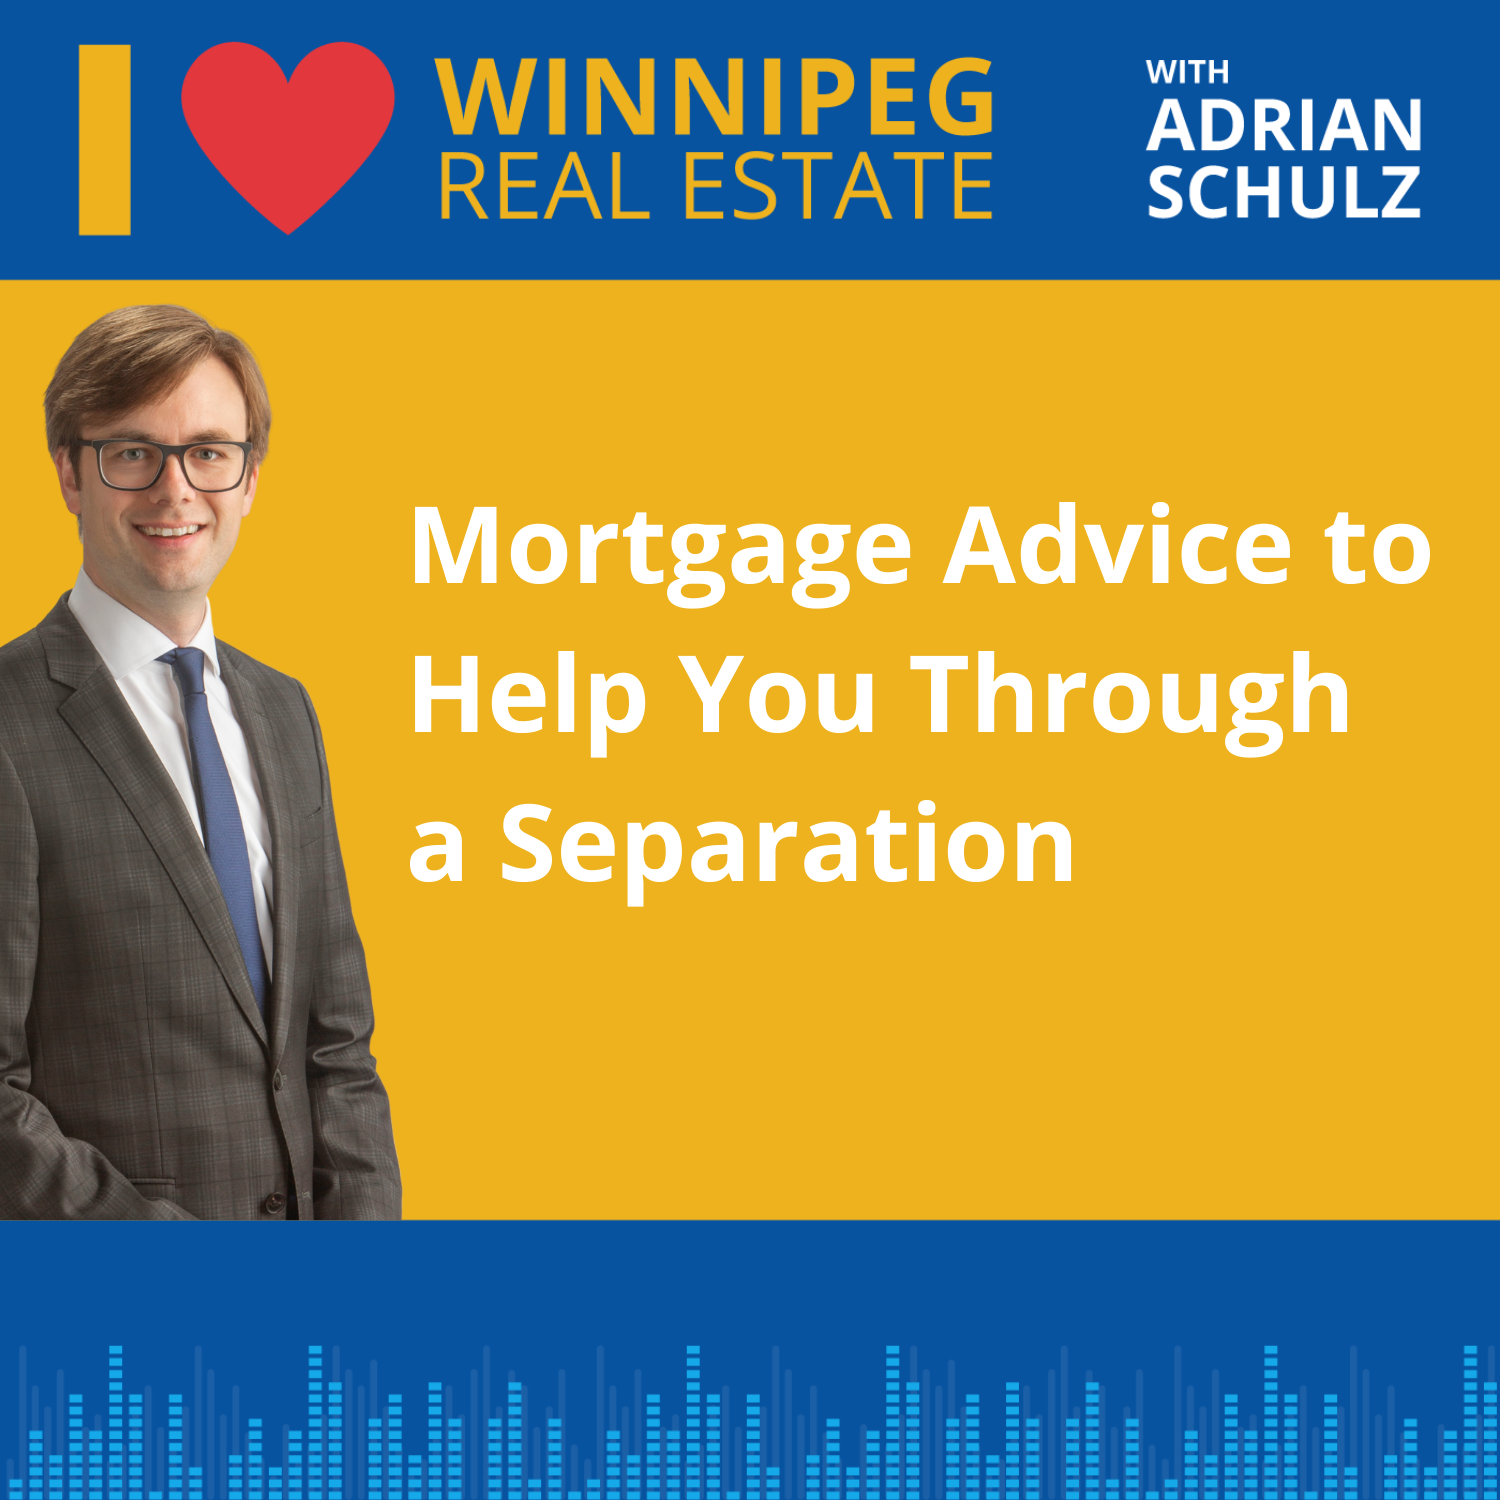 Mortgage Advice to Help You Through a Separation